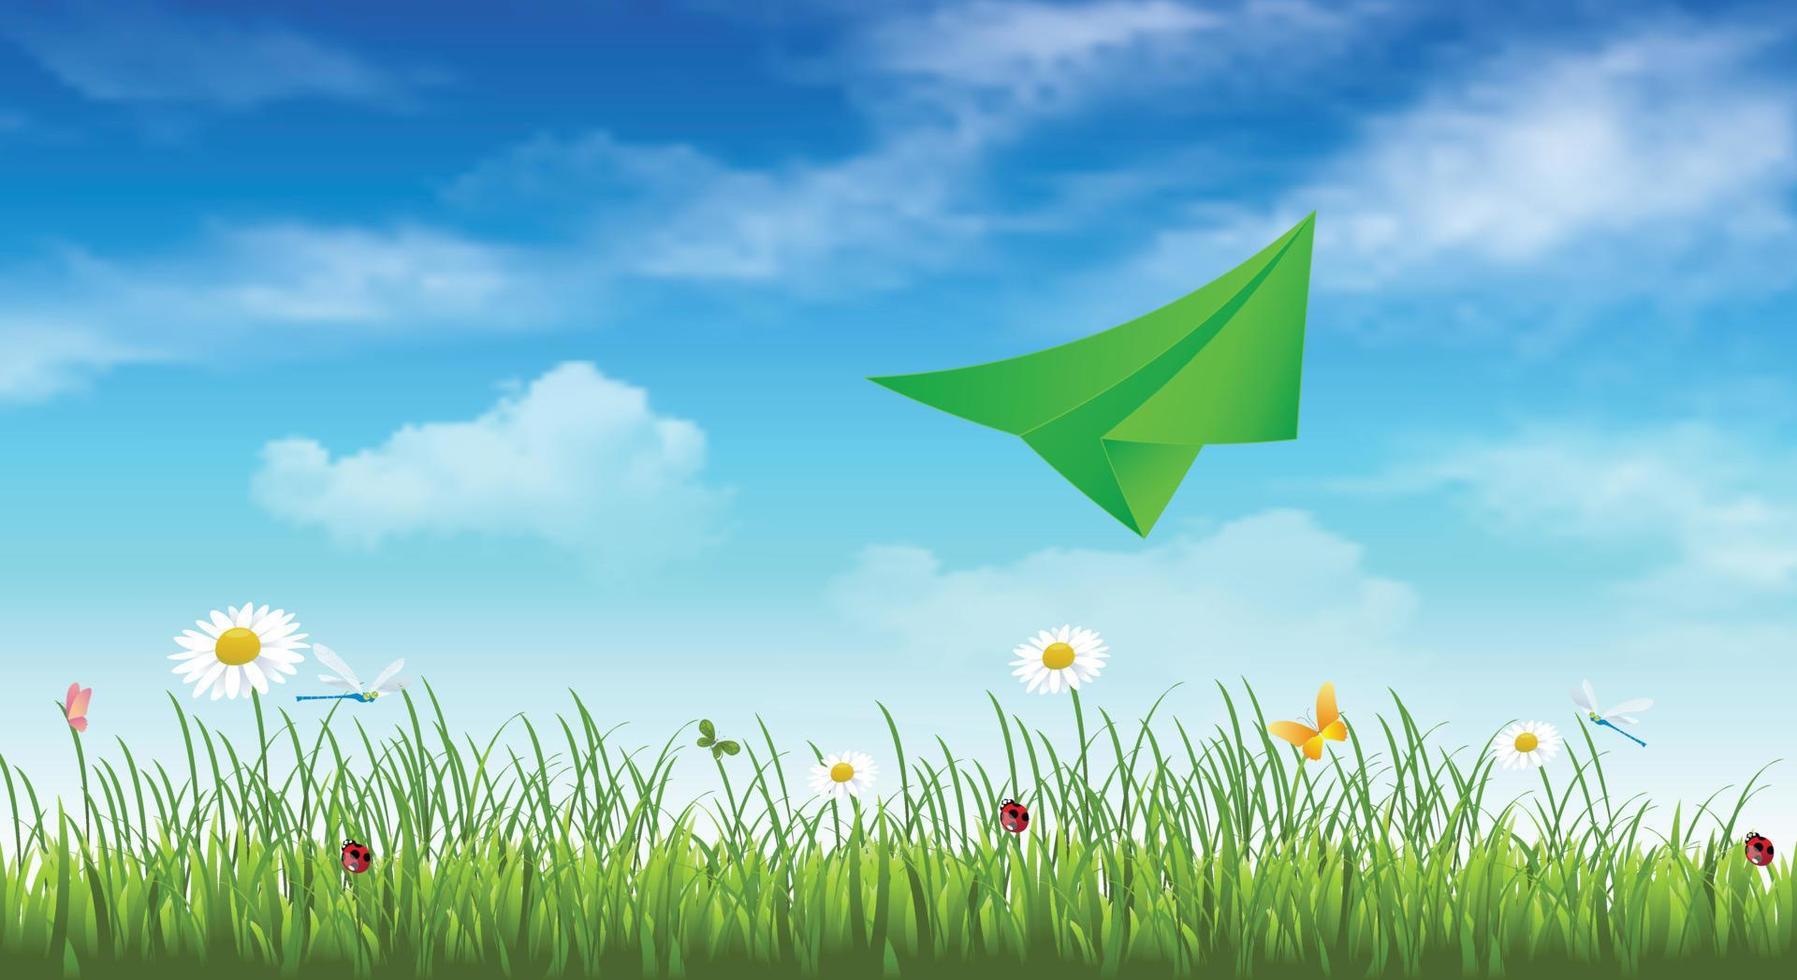 Green paper airplane on a blue sky background with clouds, green grass and flowers. Spring background. Travel banner. copy space. Vector illustration